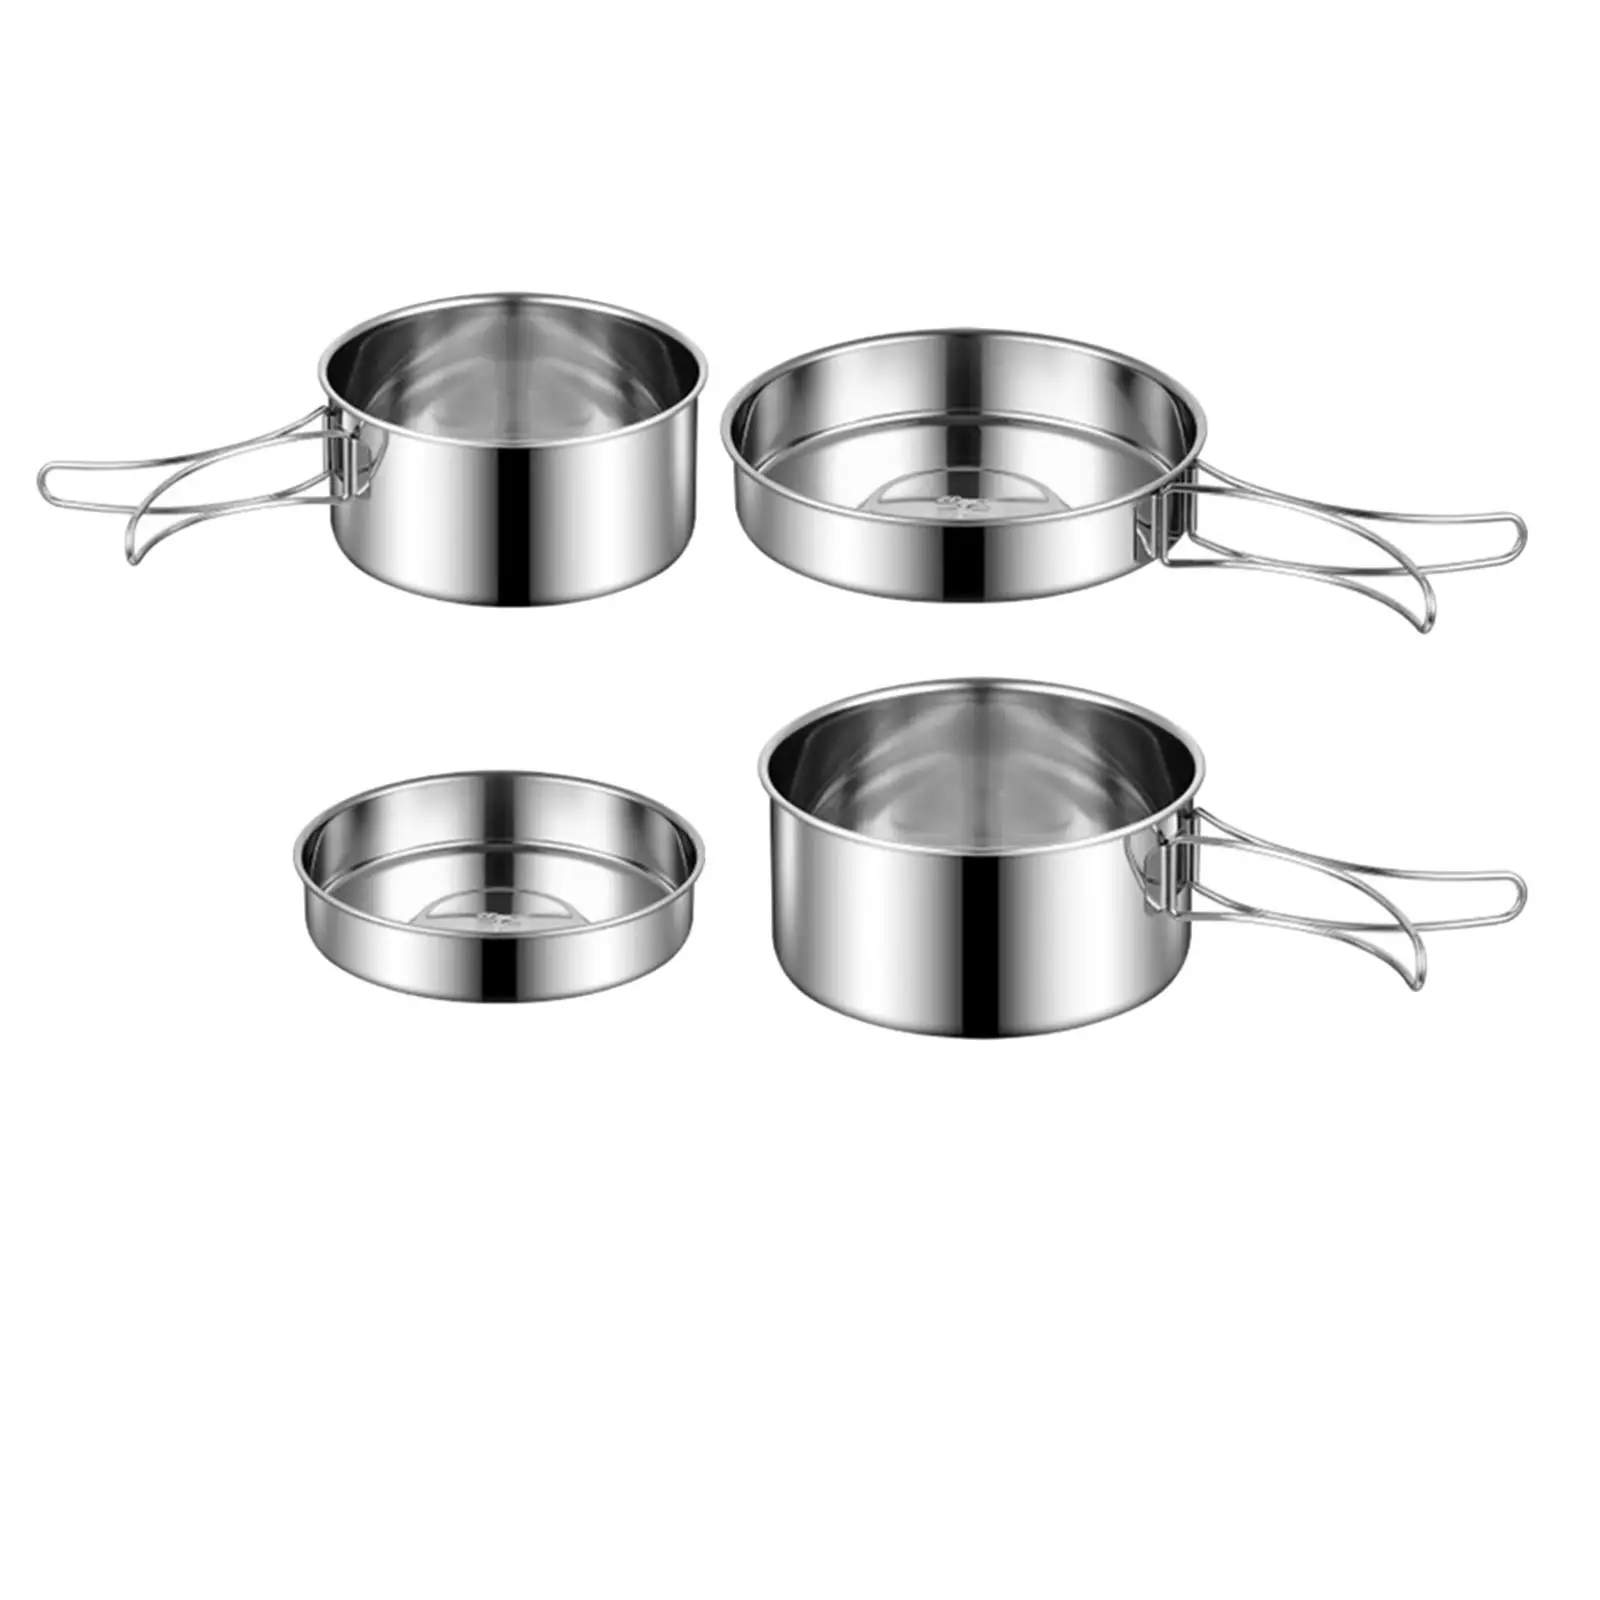 Outdoor Cooking Stockpot Compact Saucepan Kitchen Cooking Pot Camping Cookware for Hiking Camping Backpacking Outdoor Restaurant